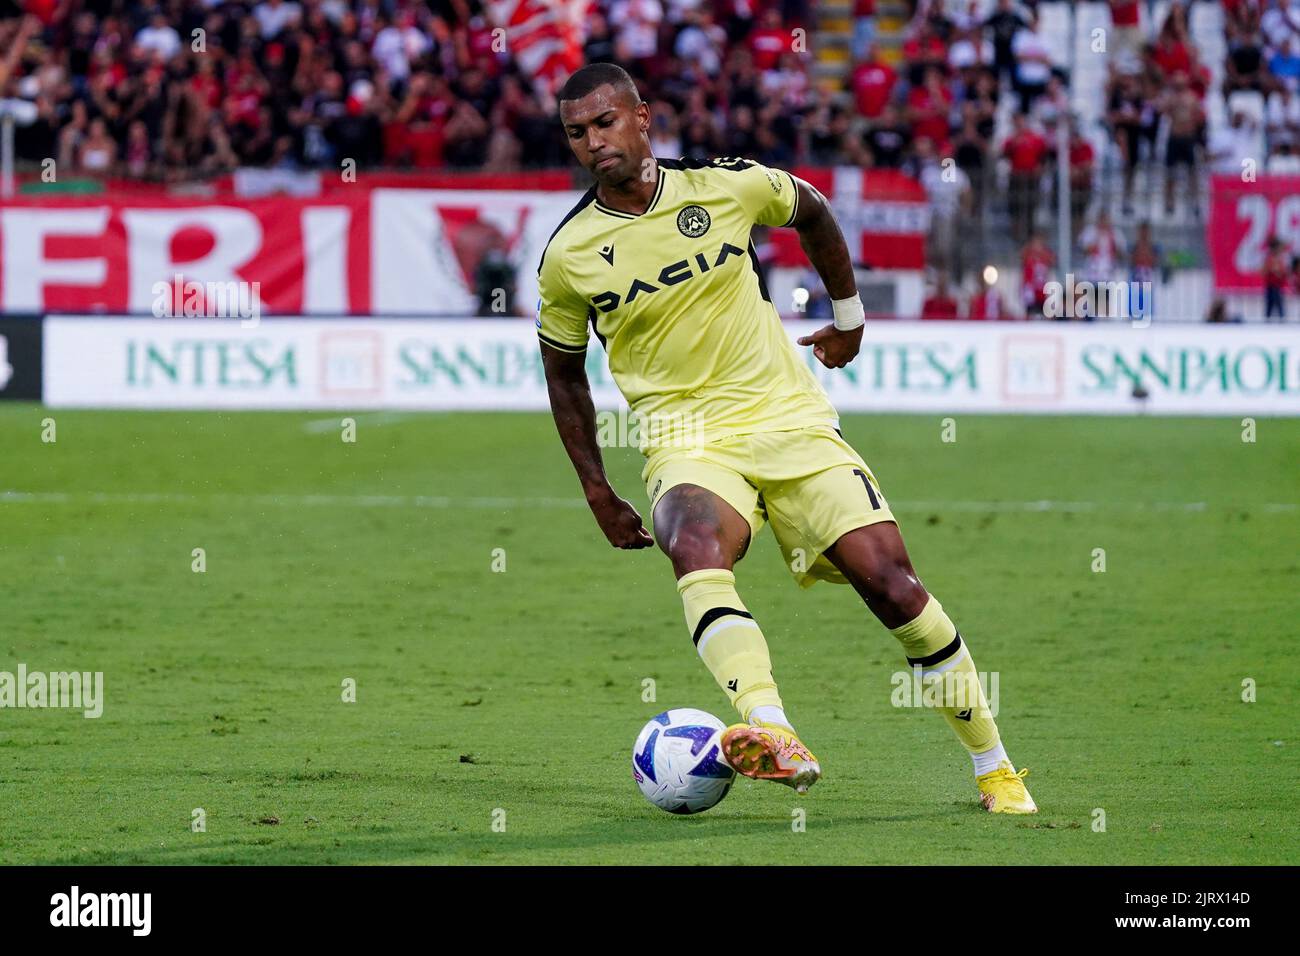 U-Power Stadium, Monza, Italy, August 26, 2022, Walace (Udinese Calcio)  during AC Monza vs Udinese Calcio - italian soccer Serie A match Credit:  Live Media Publishing Group/Alamy Live News Stock Photo - Alamy